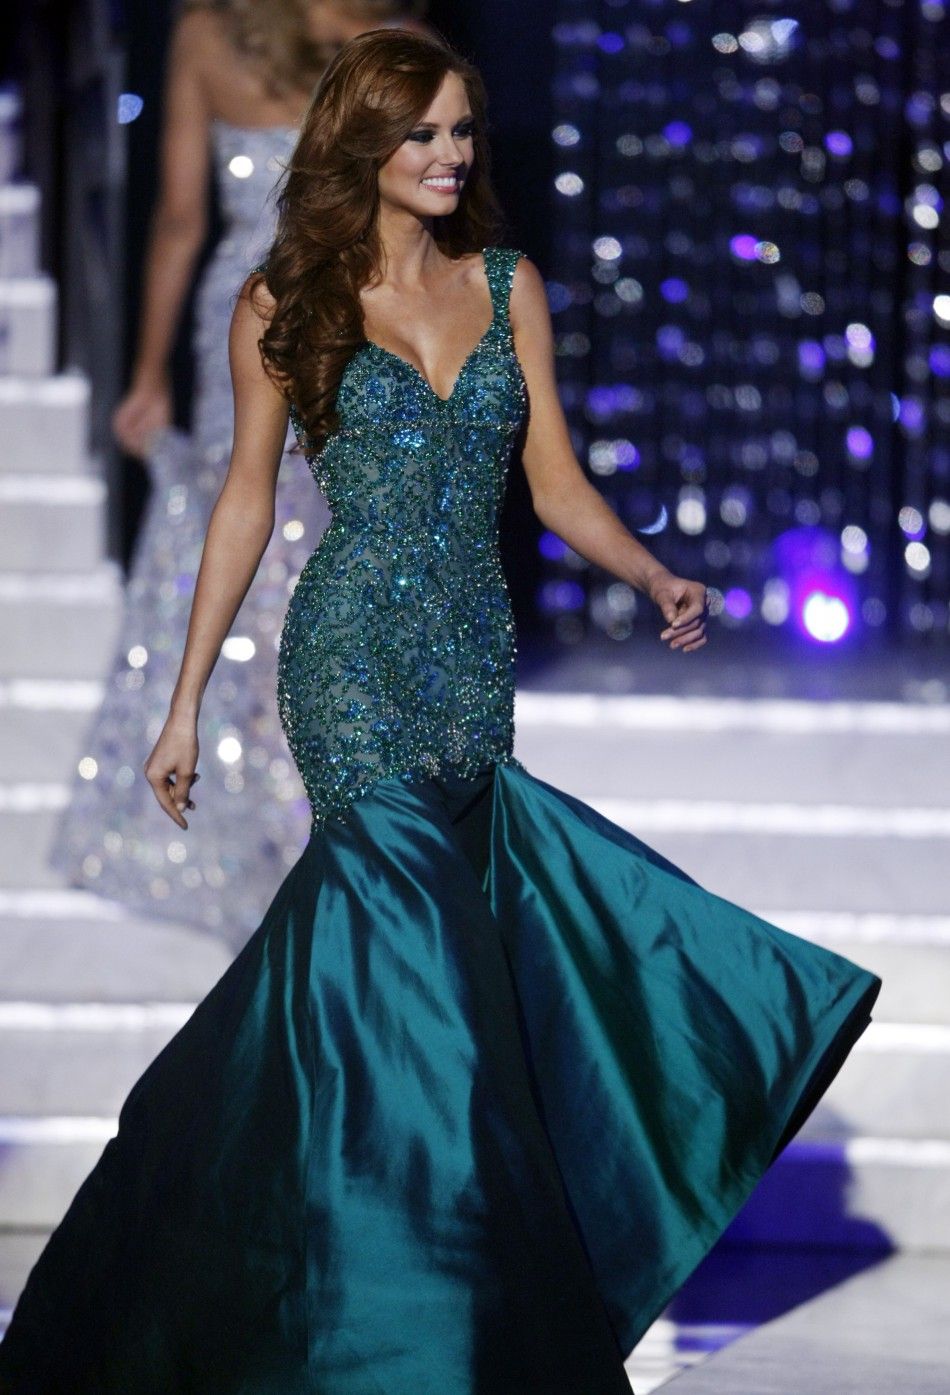 Miss California Alyssa Campanella competes in her evening gown during the 2011 Miss USA pageant in the Theatre for the Performing Arts at Planet Hollywood Hotel and Casino in Las Vegas, Nevada June 19, 2011.